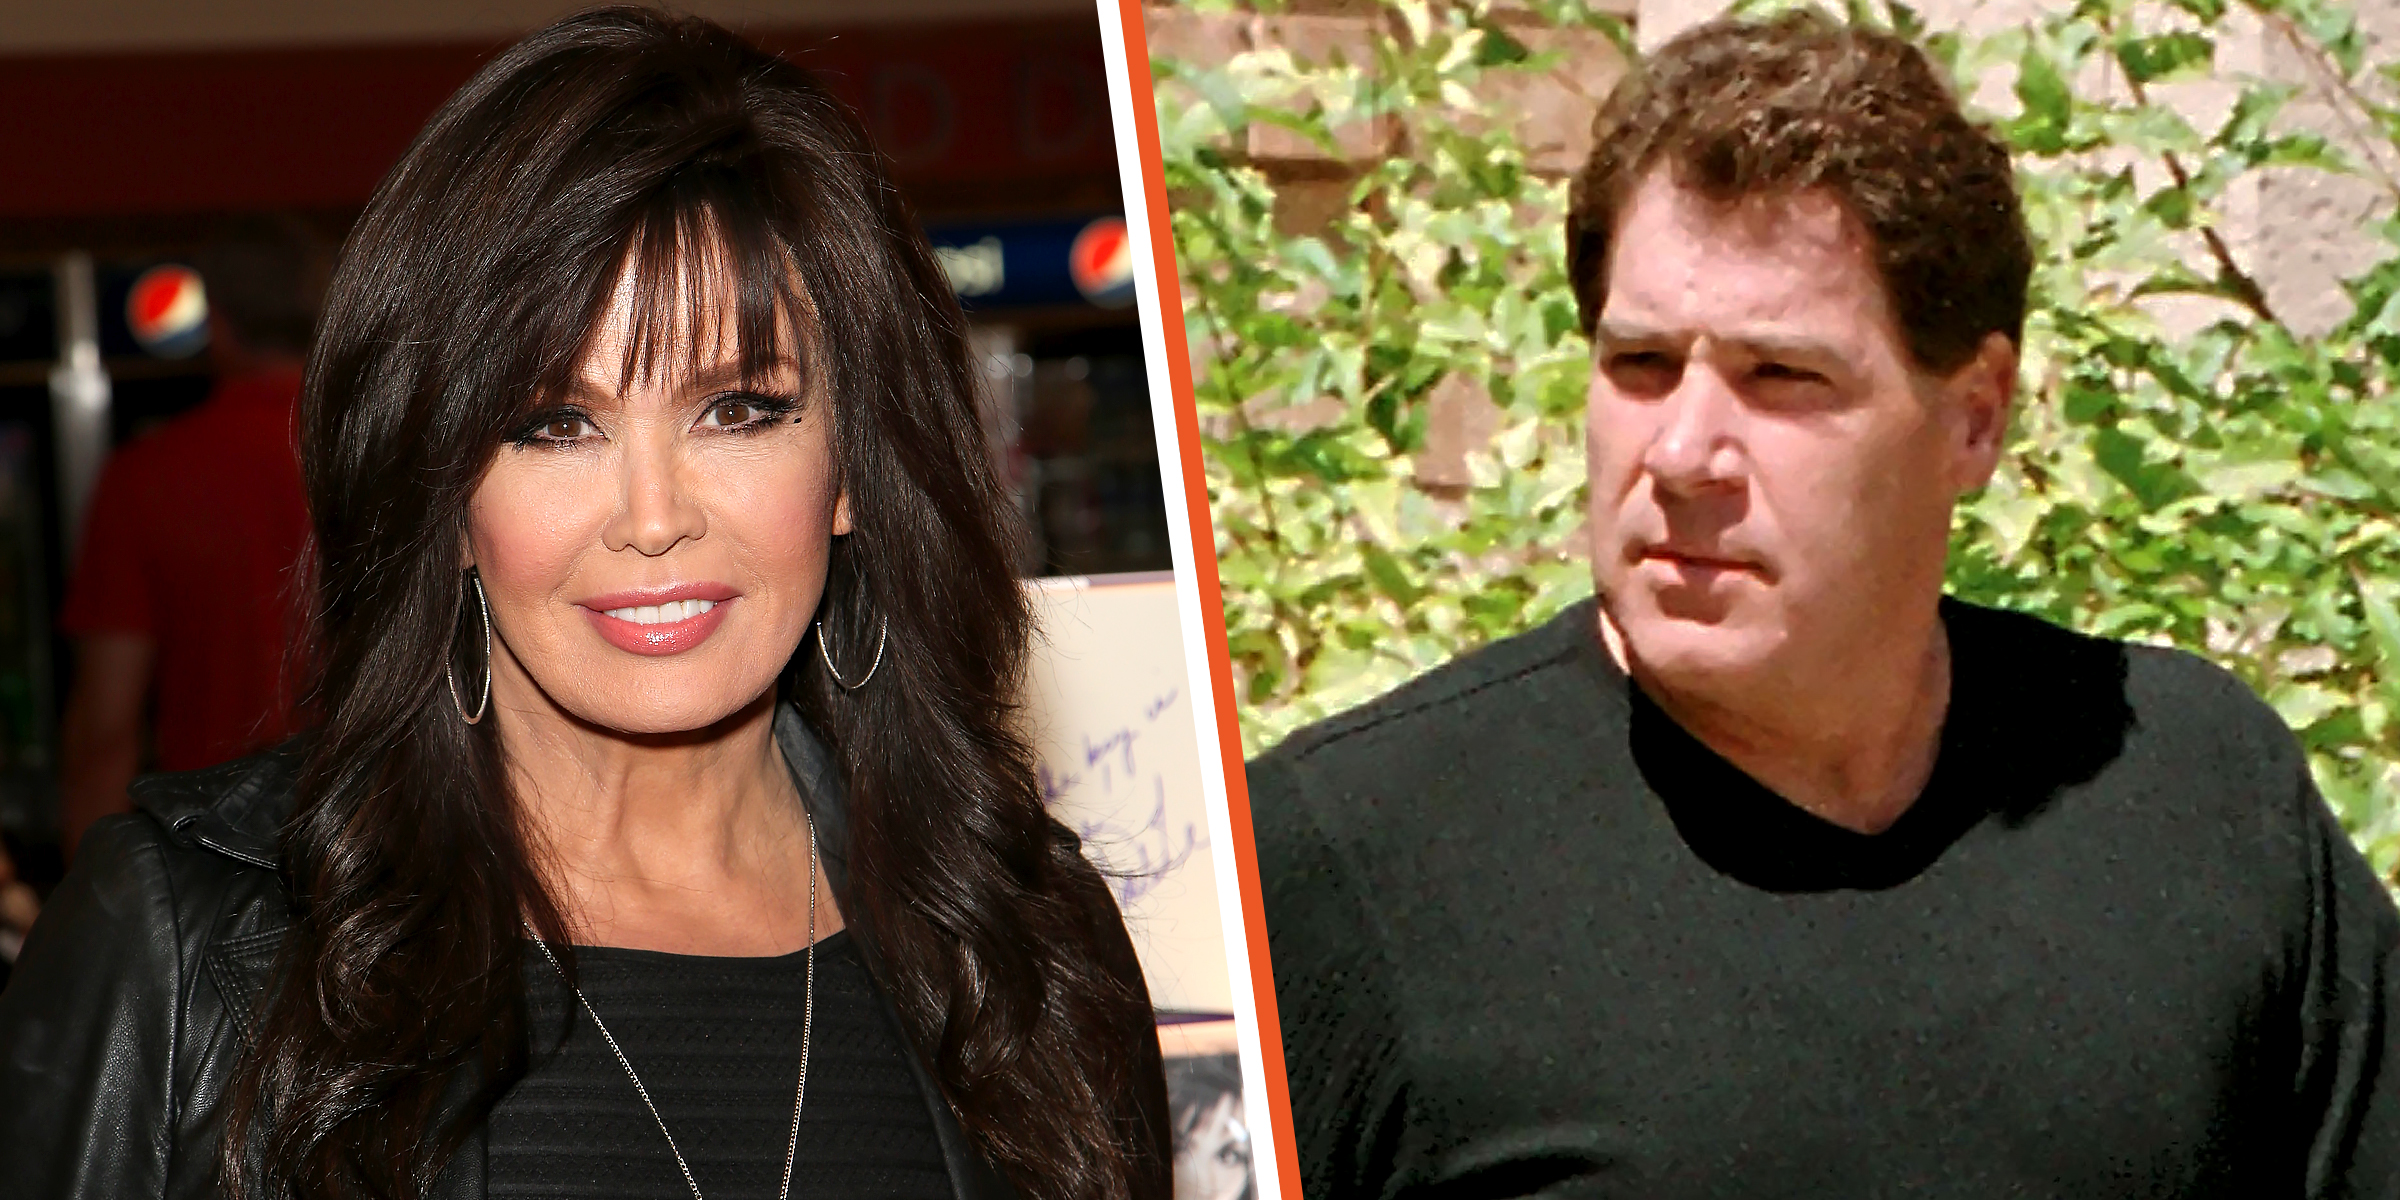 Marie Osmond | Brian Blosil | Source: Getty Images